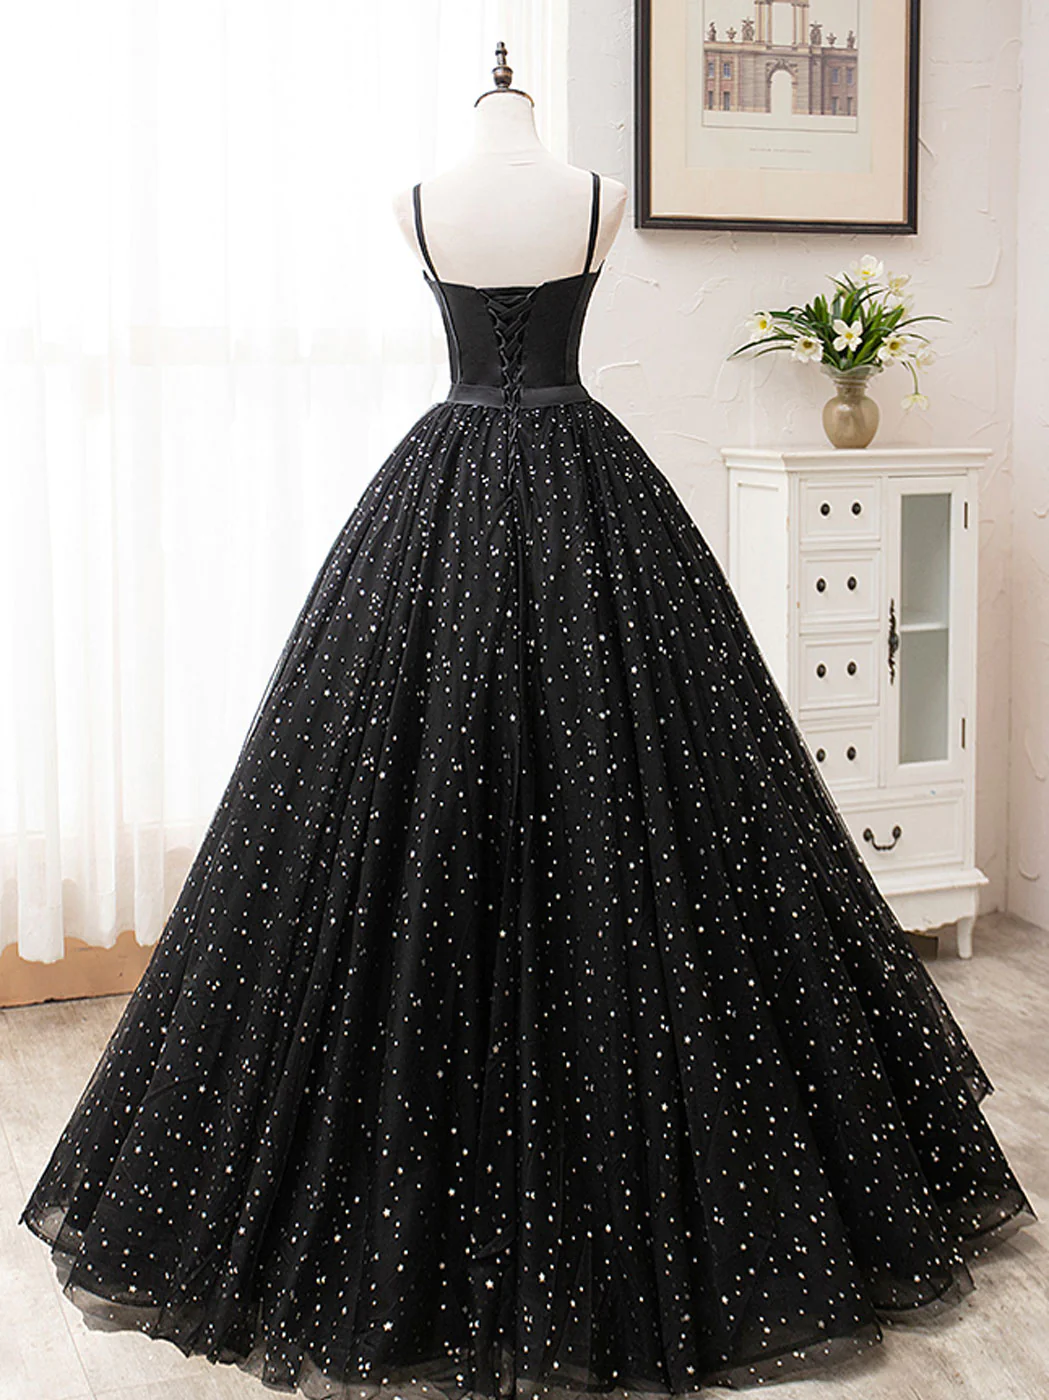 Strapless Strap Ball Gown Black Prom Dress Evening..